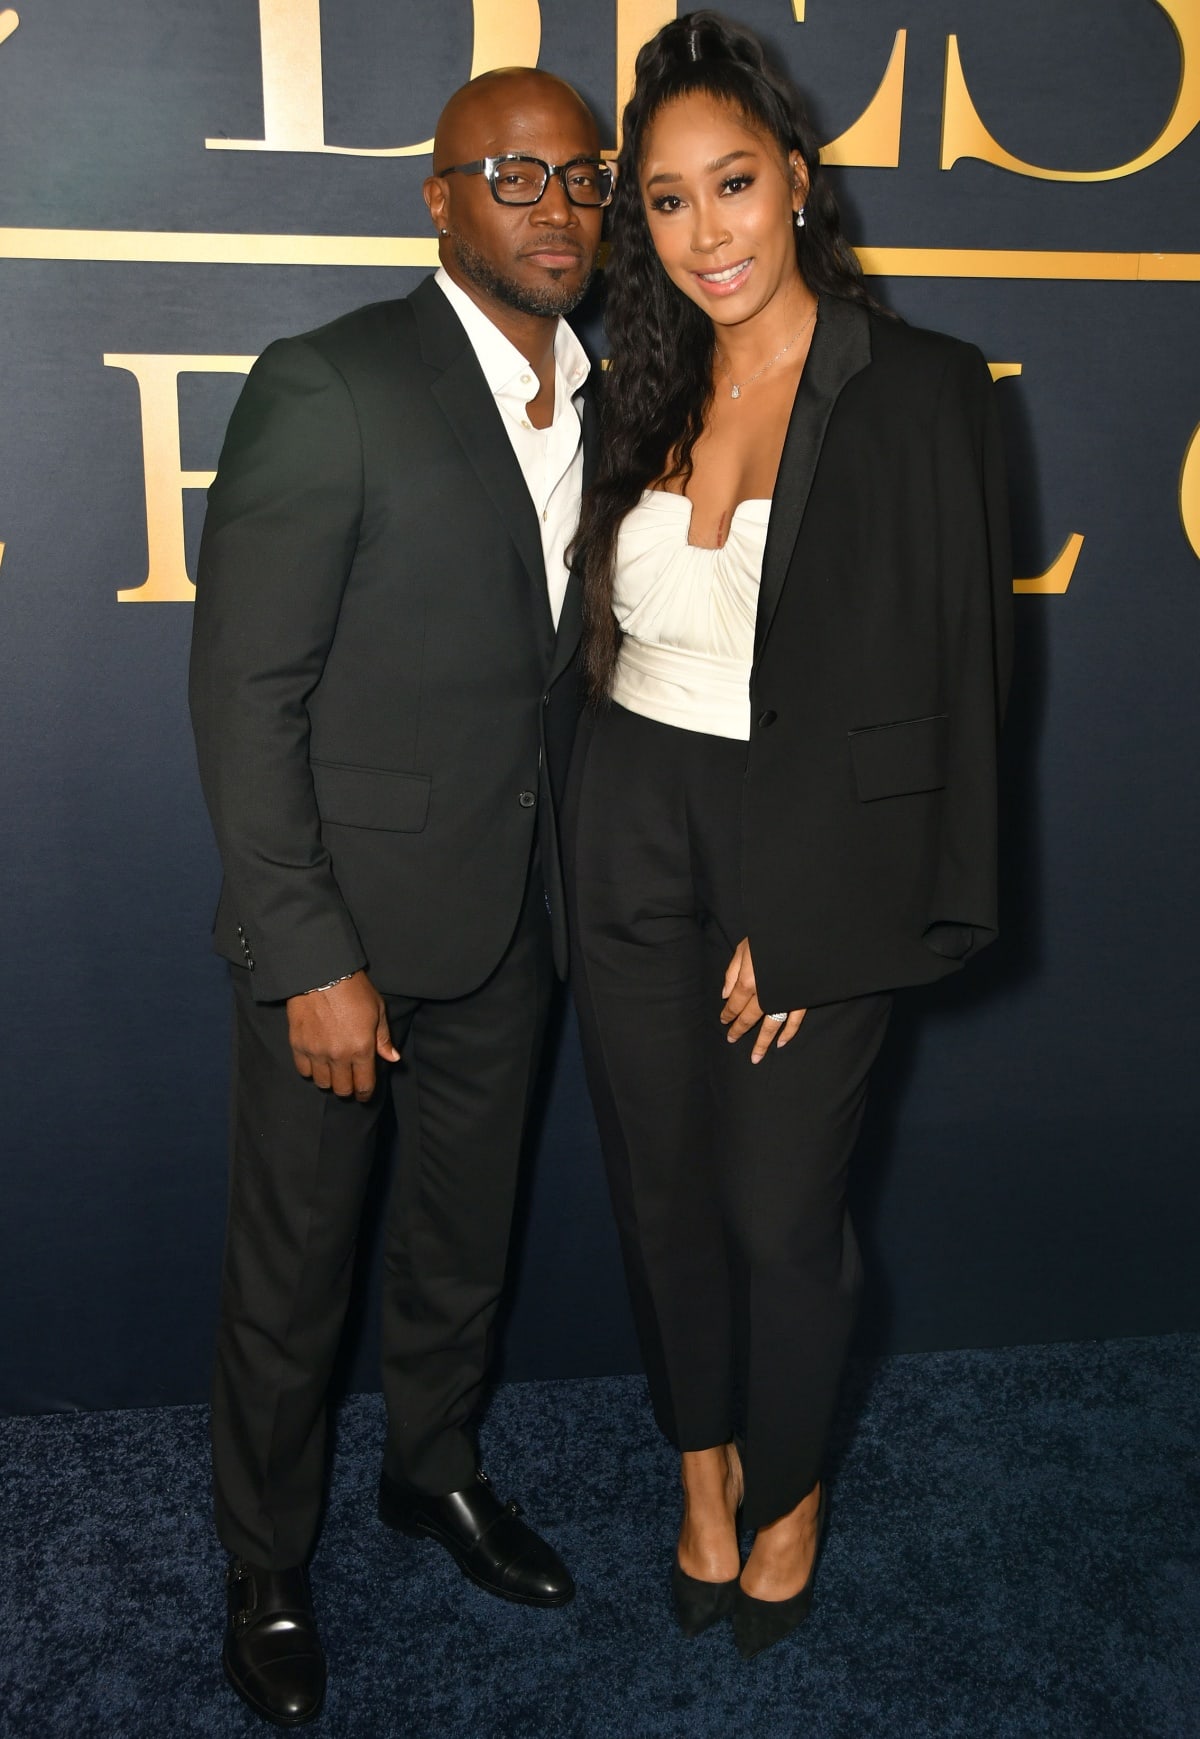 Taye Diggs and Apryl Jones making an appearance at Peacock’s The Best Man: The Final Chapters premiere event